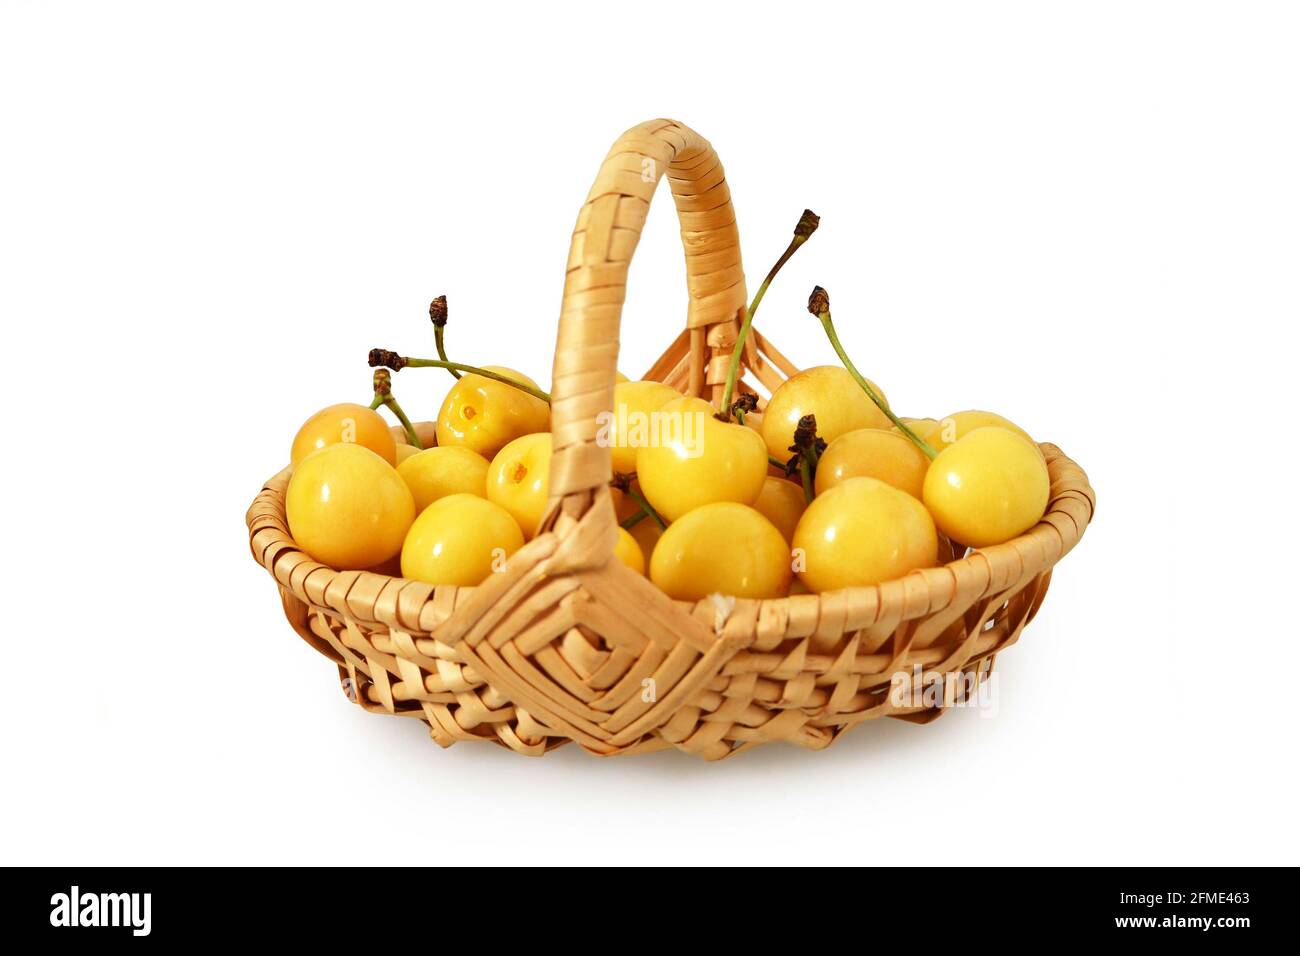 Basket of sweet cherries isolated on white background Stock Photo